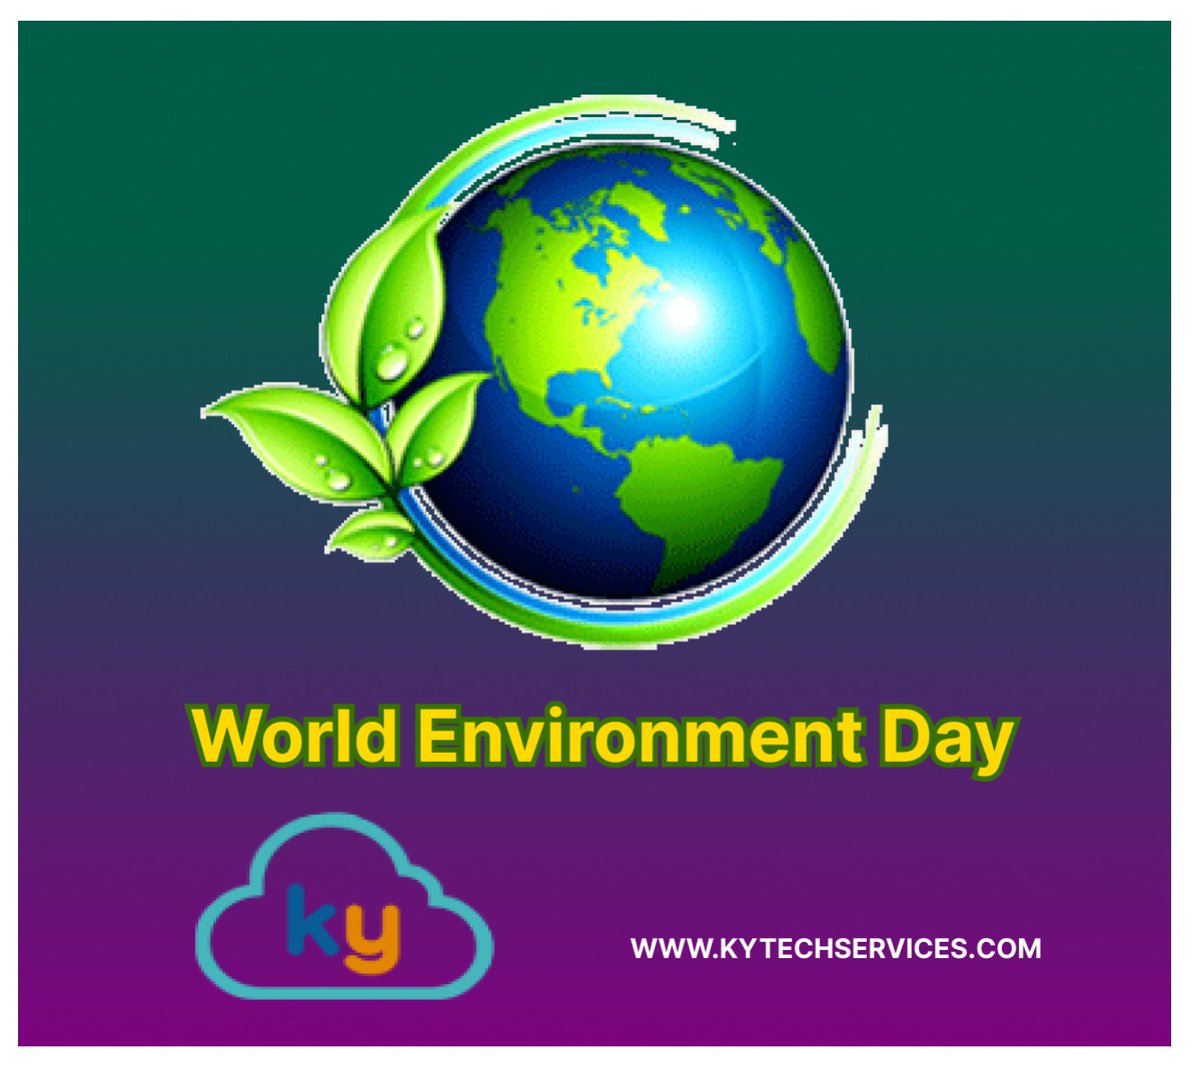 Let's Unite to Save the Environment!

#kytechnologies #kytechservices #productdevelopment 
#softwaredevelopment  #application #cloudmigration
#learningmanagementsystems #Humanresourcemanagementsystems #inventorymanagement #industry40 #erp #industry40 #hiringjobs #agrosahayam